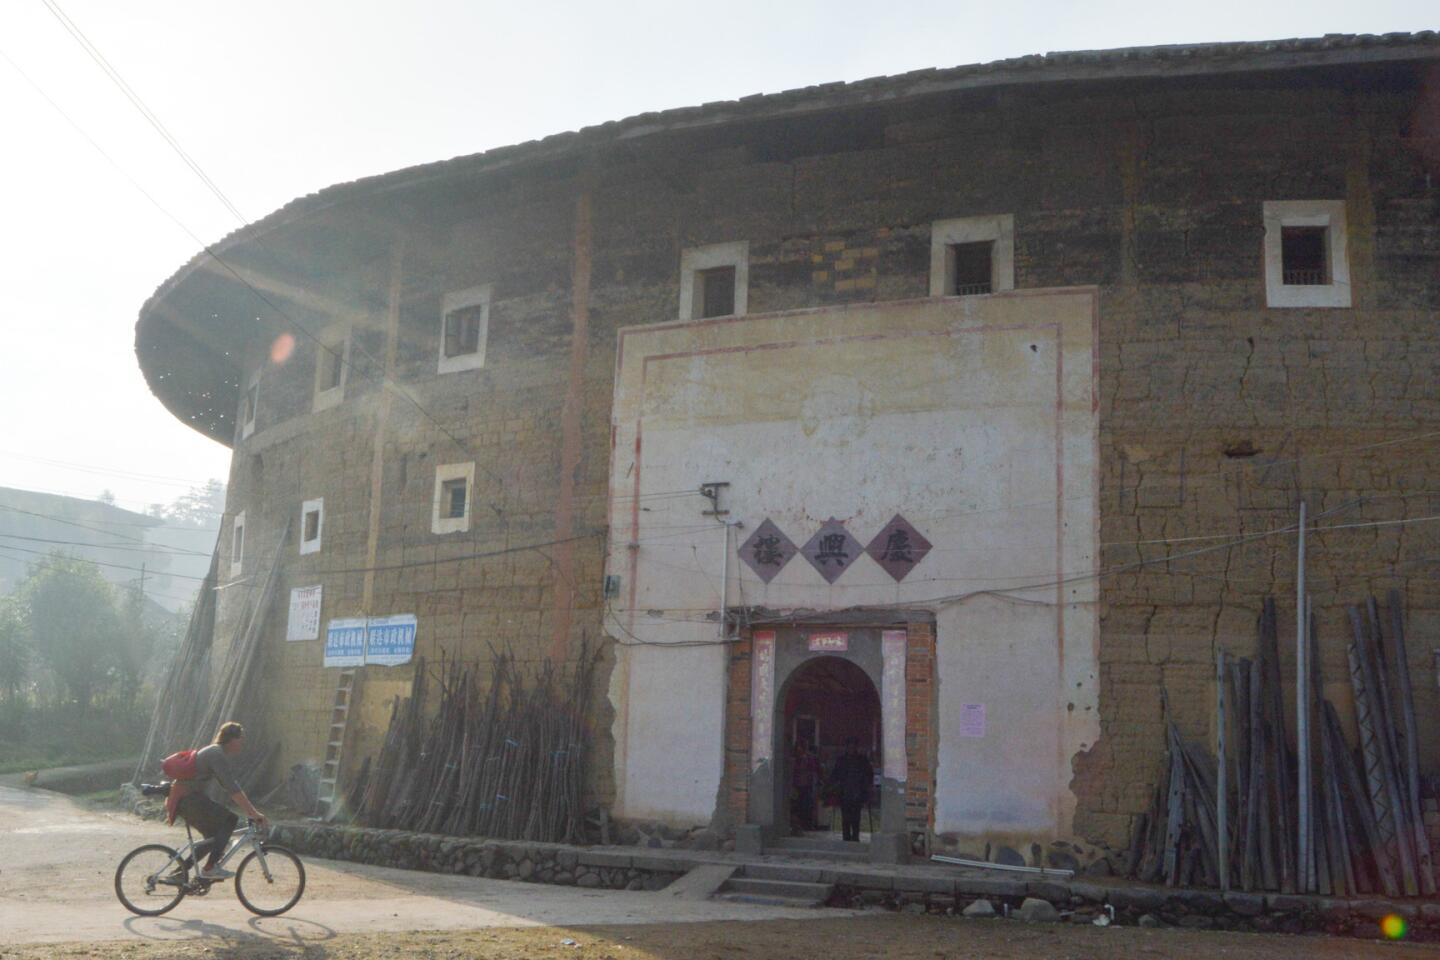 Great Read: In China, clans' fortress homes abandoned for modern